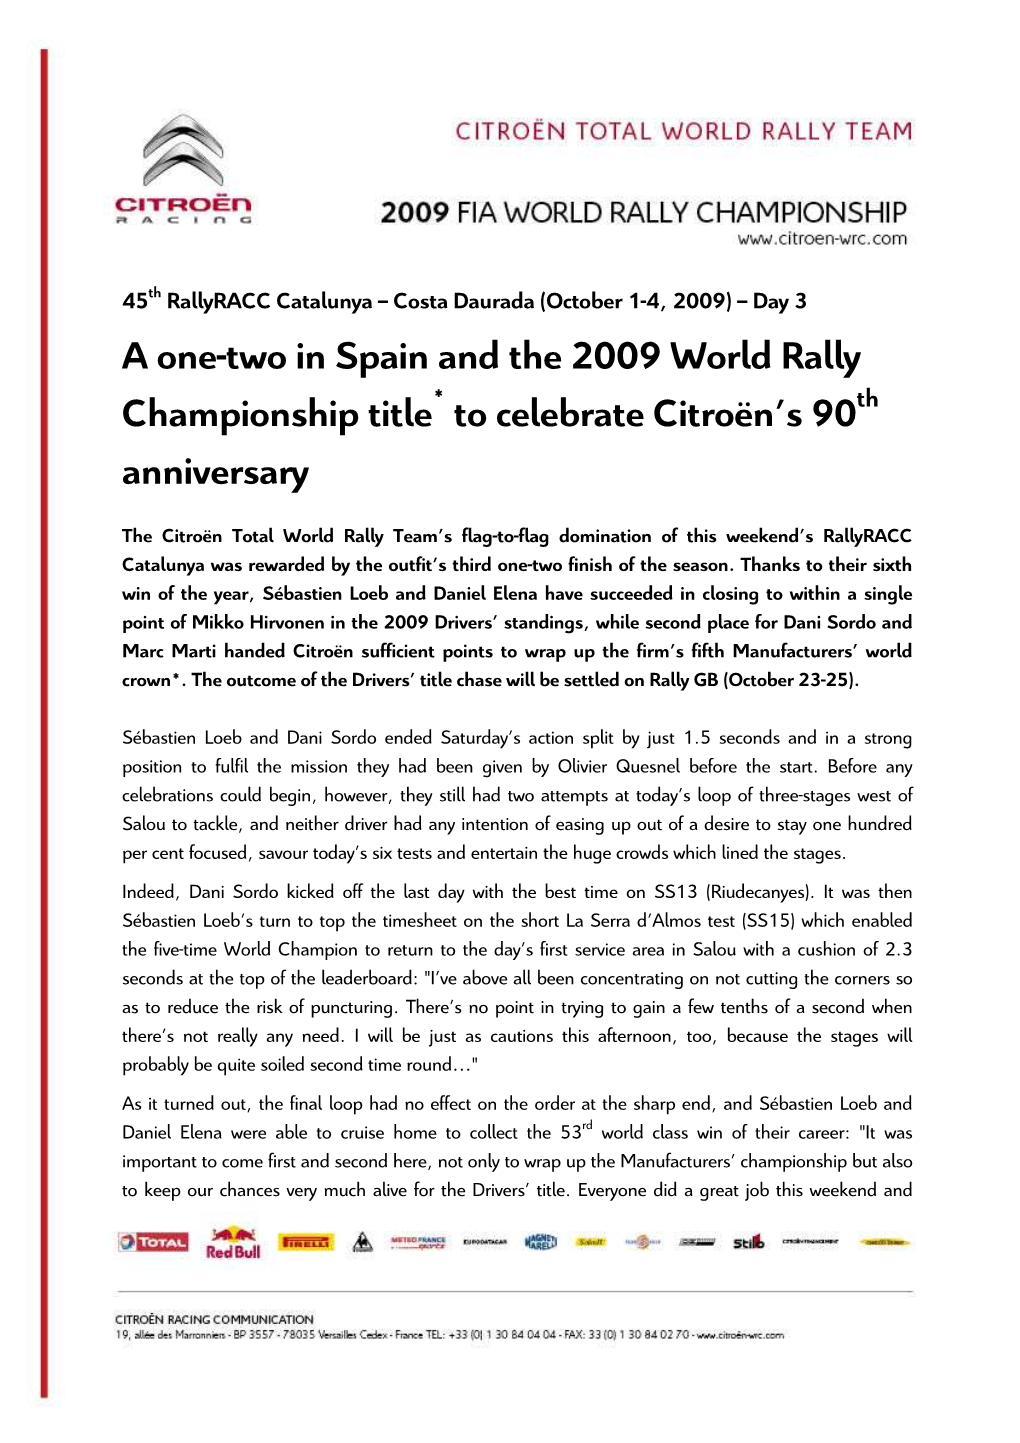 A One-Two in Spain and the 2009 World Rally Championship Title to Celebrate Citroën's 90 Anniversary